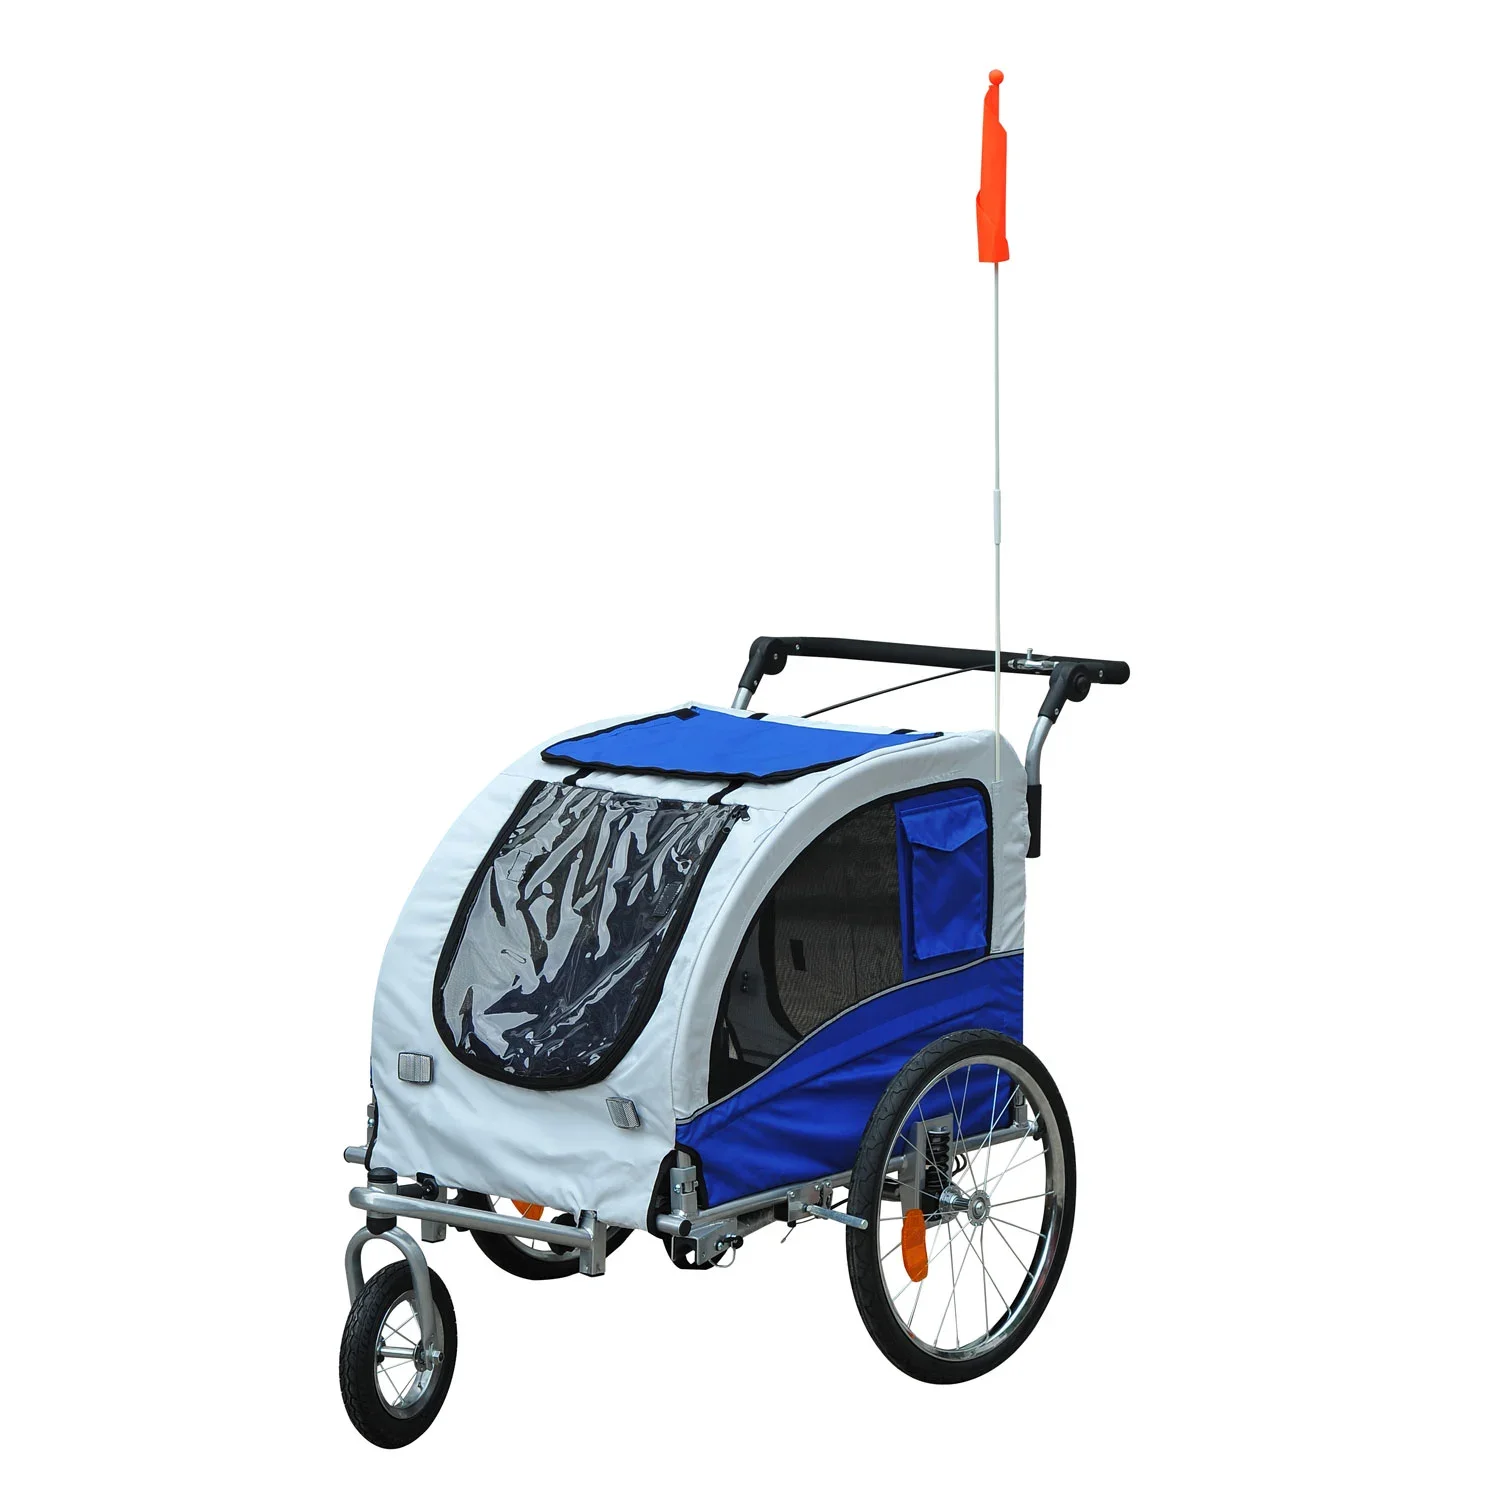 

Multi-function Bicycle camping trailer jogger stroller for pets